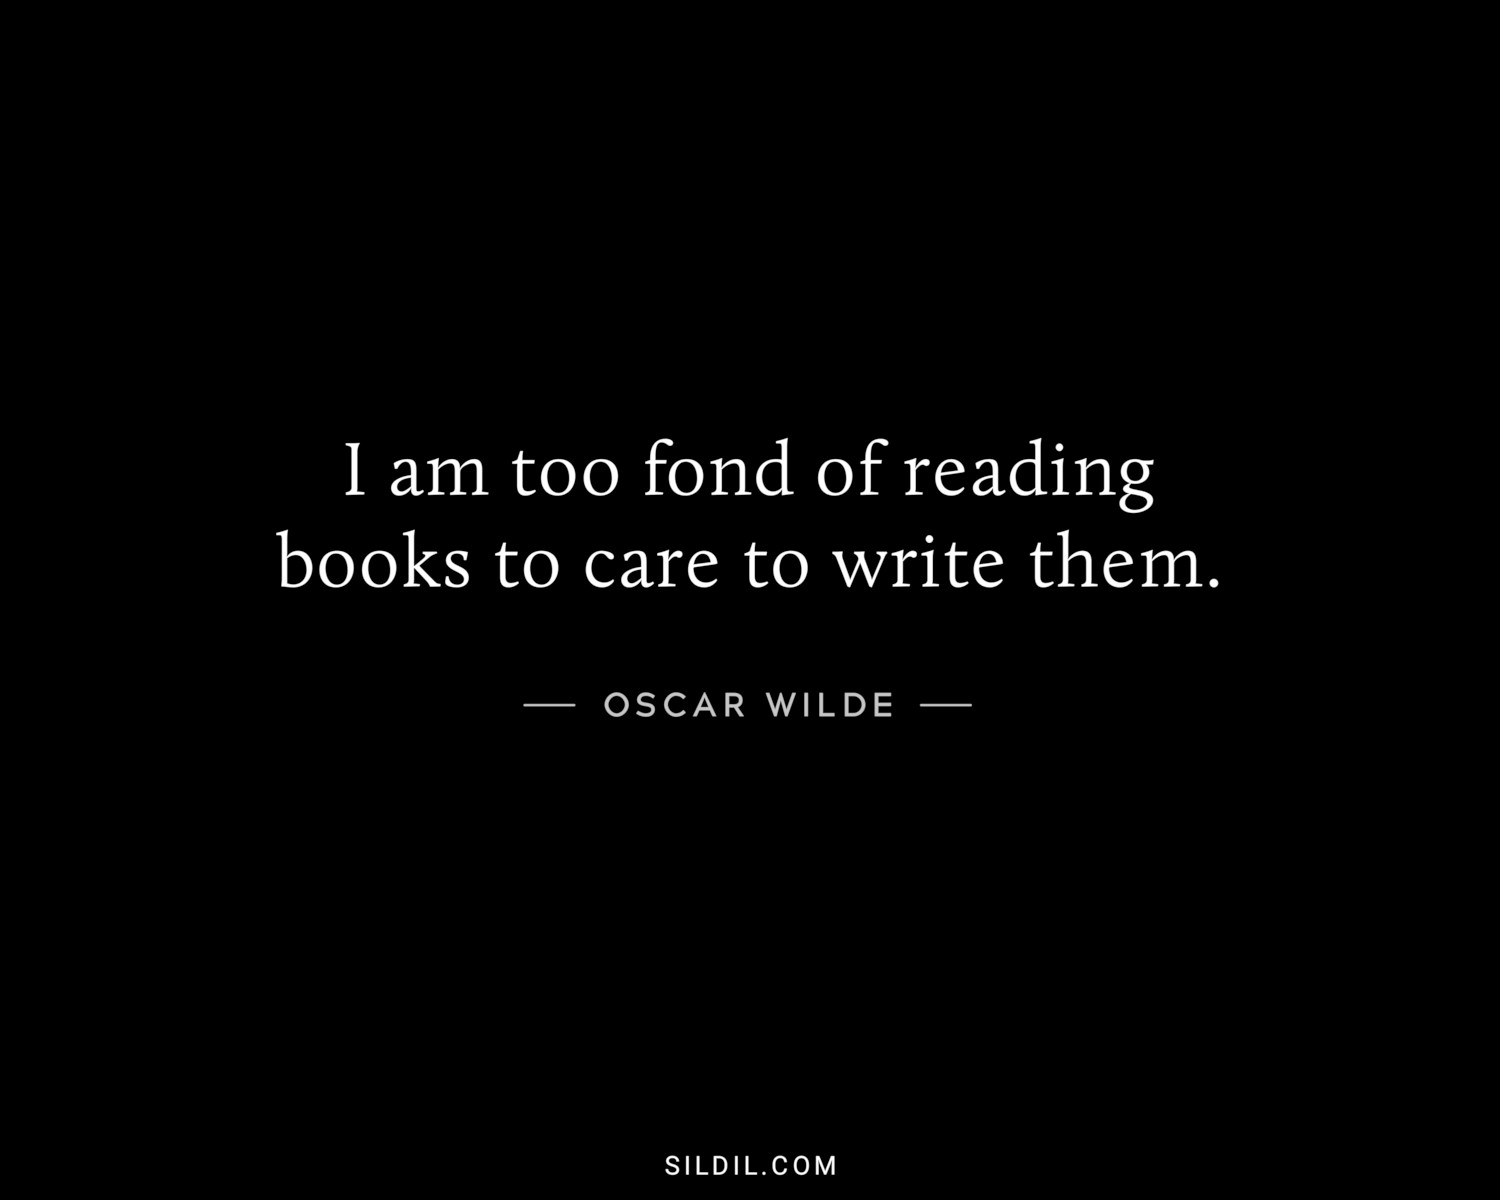 I am too fond of reading books to care to write them.